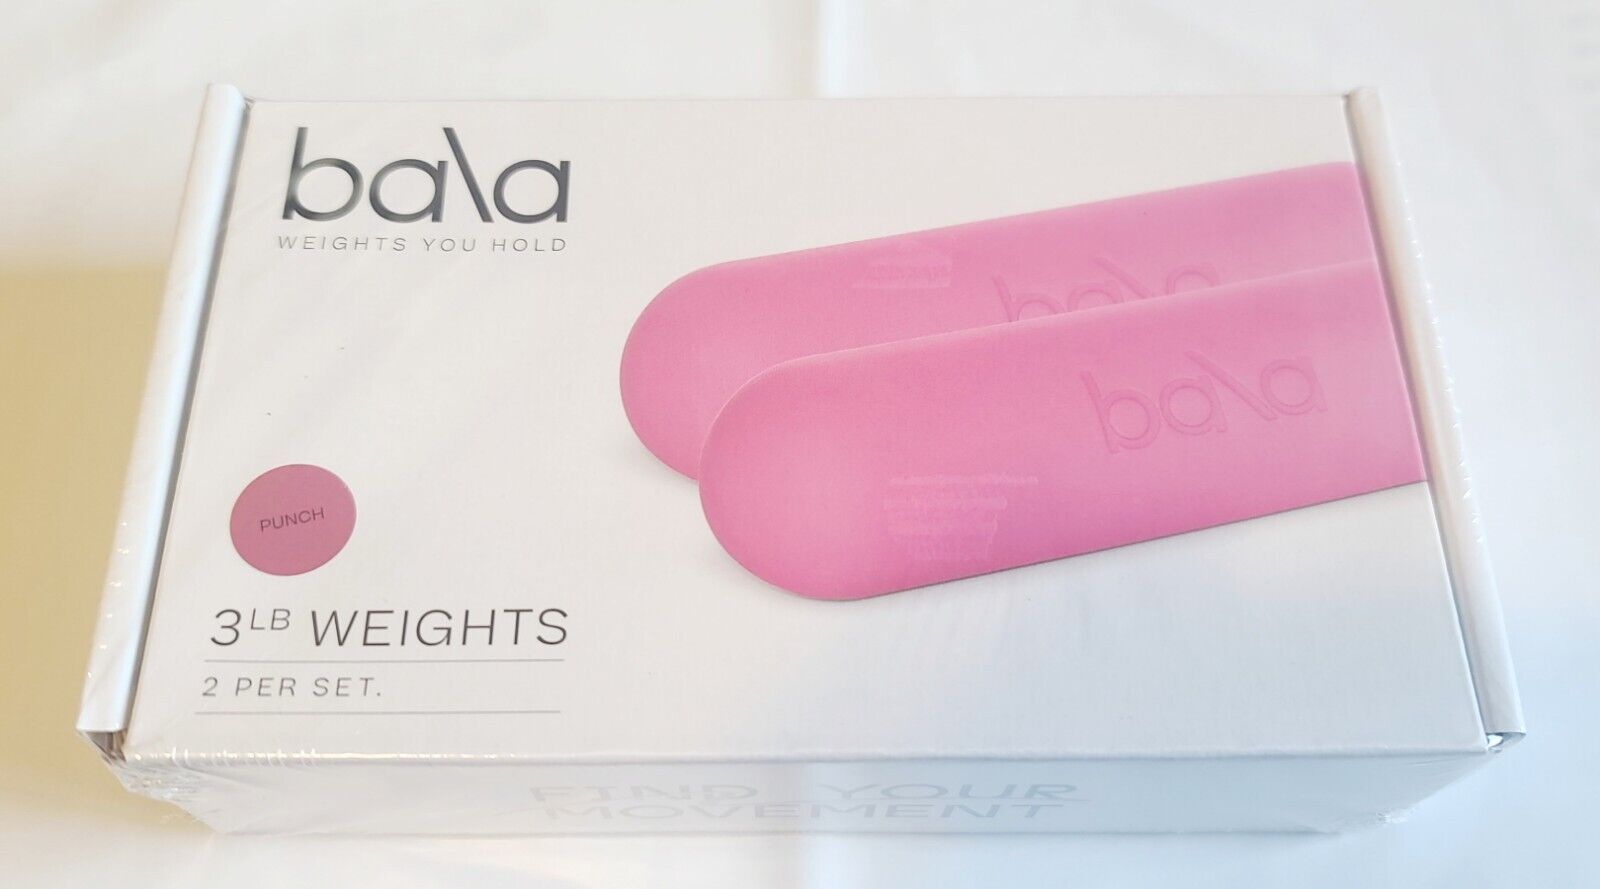 Bala Bars 2pc Hand 3 Pound Weight Set - Pink Punch 3lbs - 6lbs total